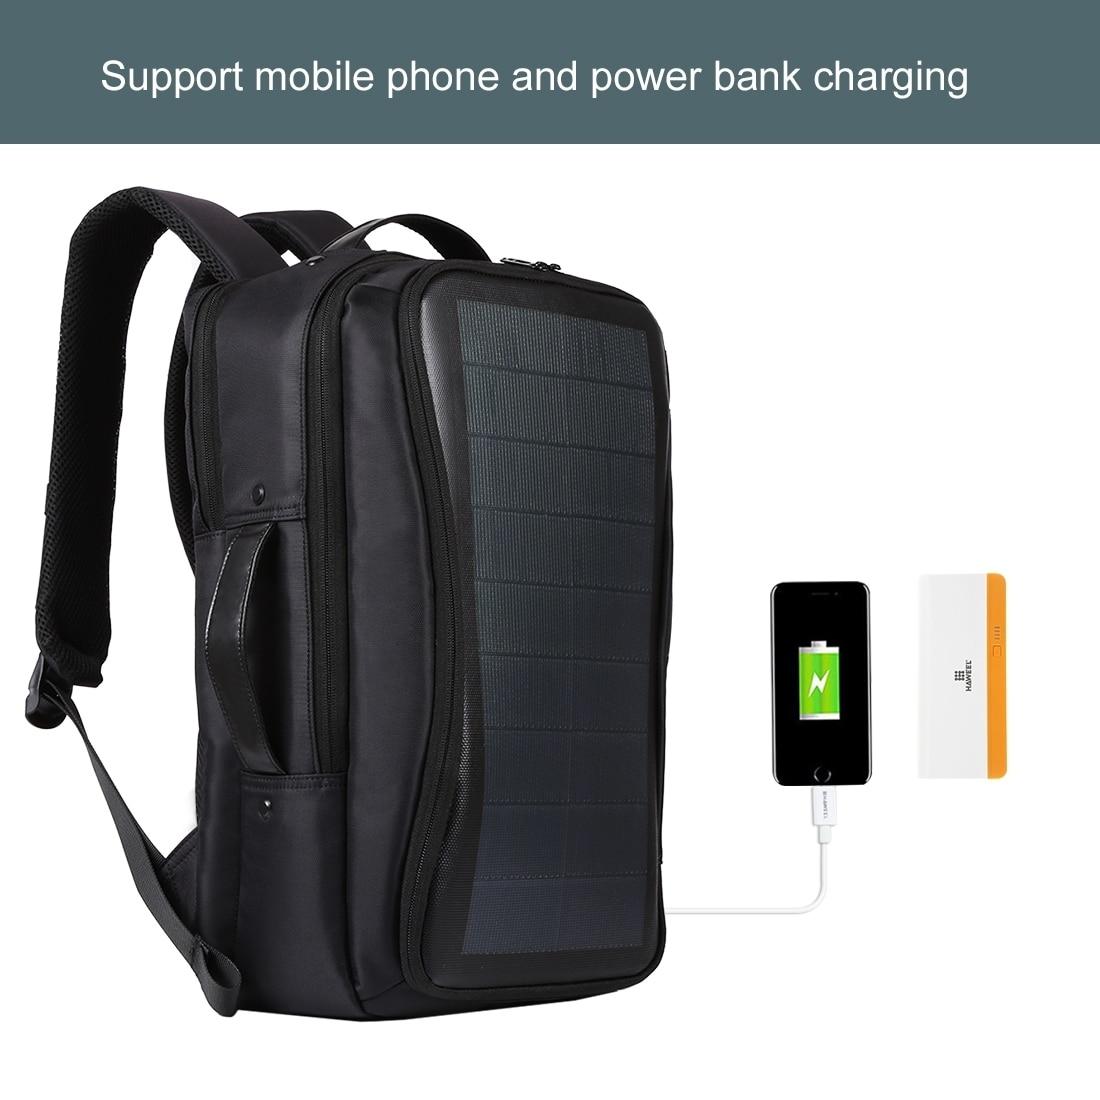 Solar Panel Backpacks Convenience Charging Laptop Bags for Travel 12W Solar Charger Daypacks &Handle &USB Port